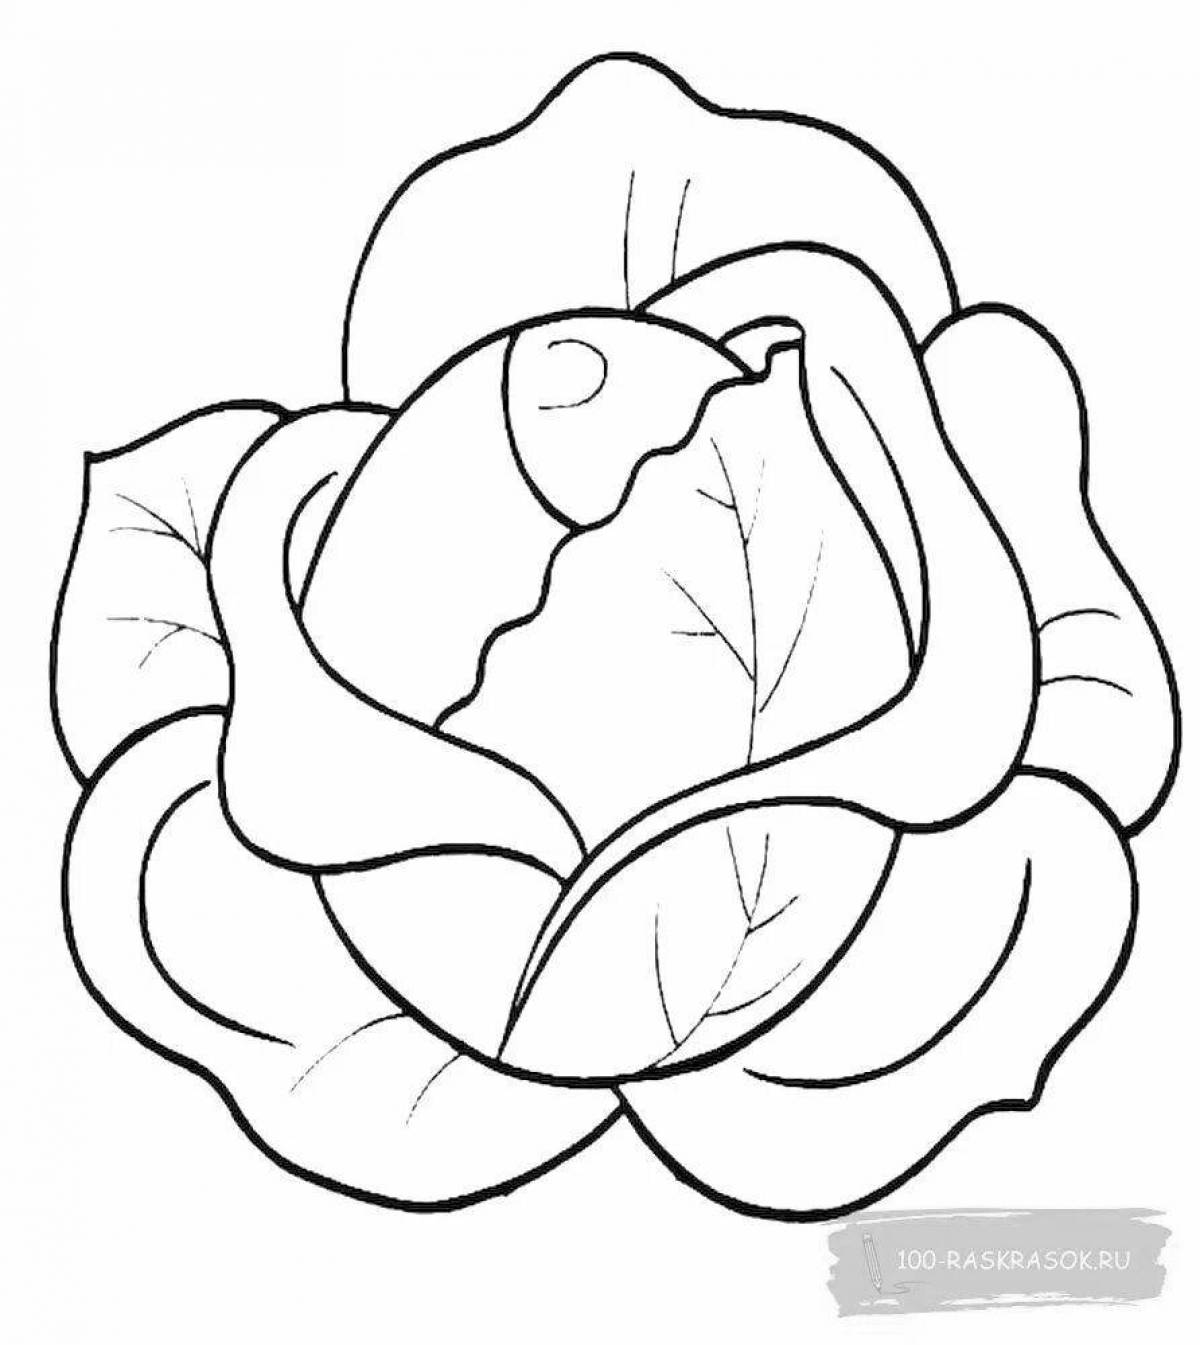 Colorful cabbage coloring page for 3-4 year olds